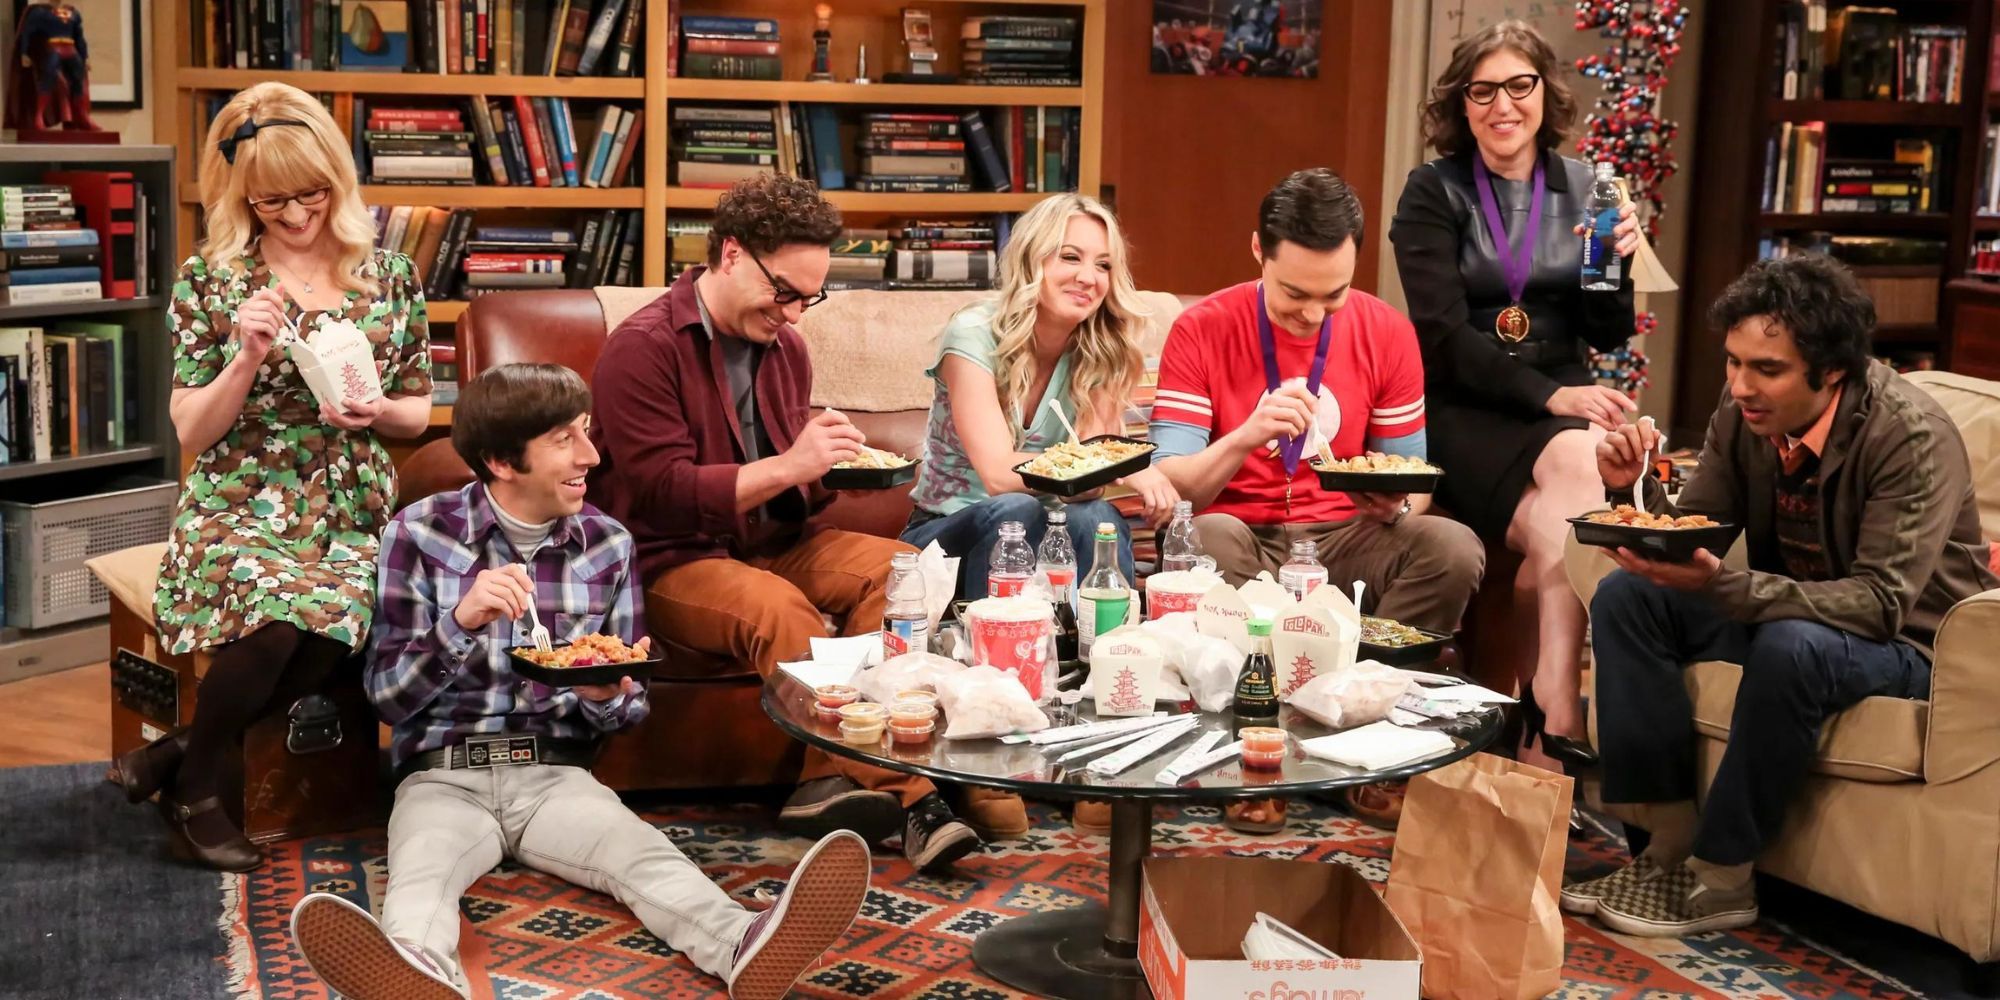 The group from The Big Bang Theory eating together